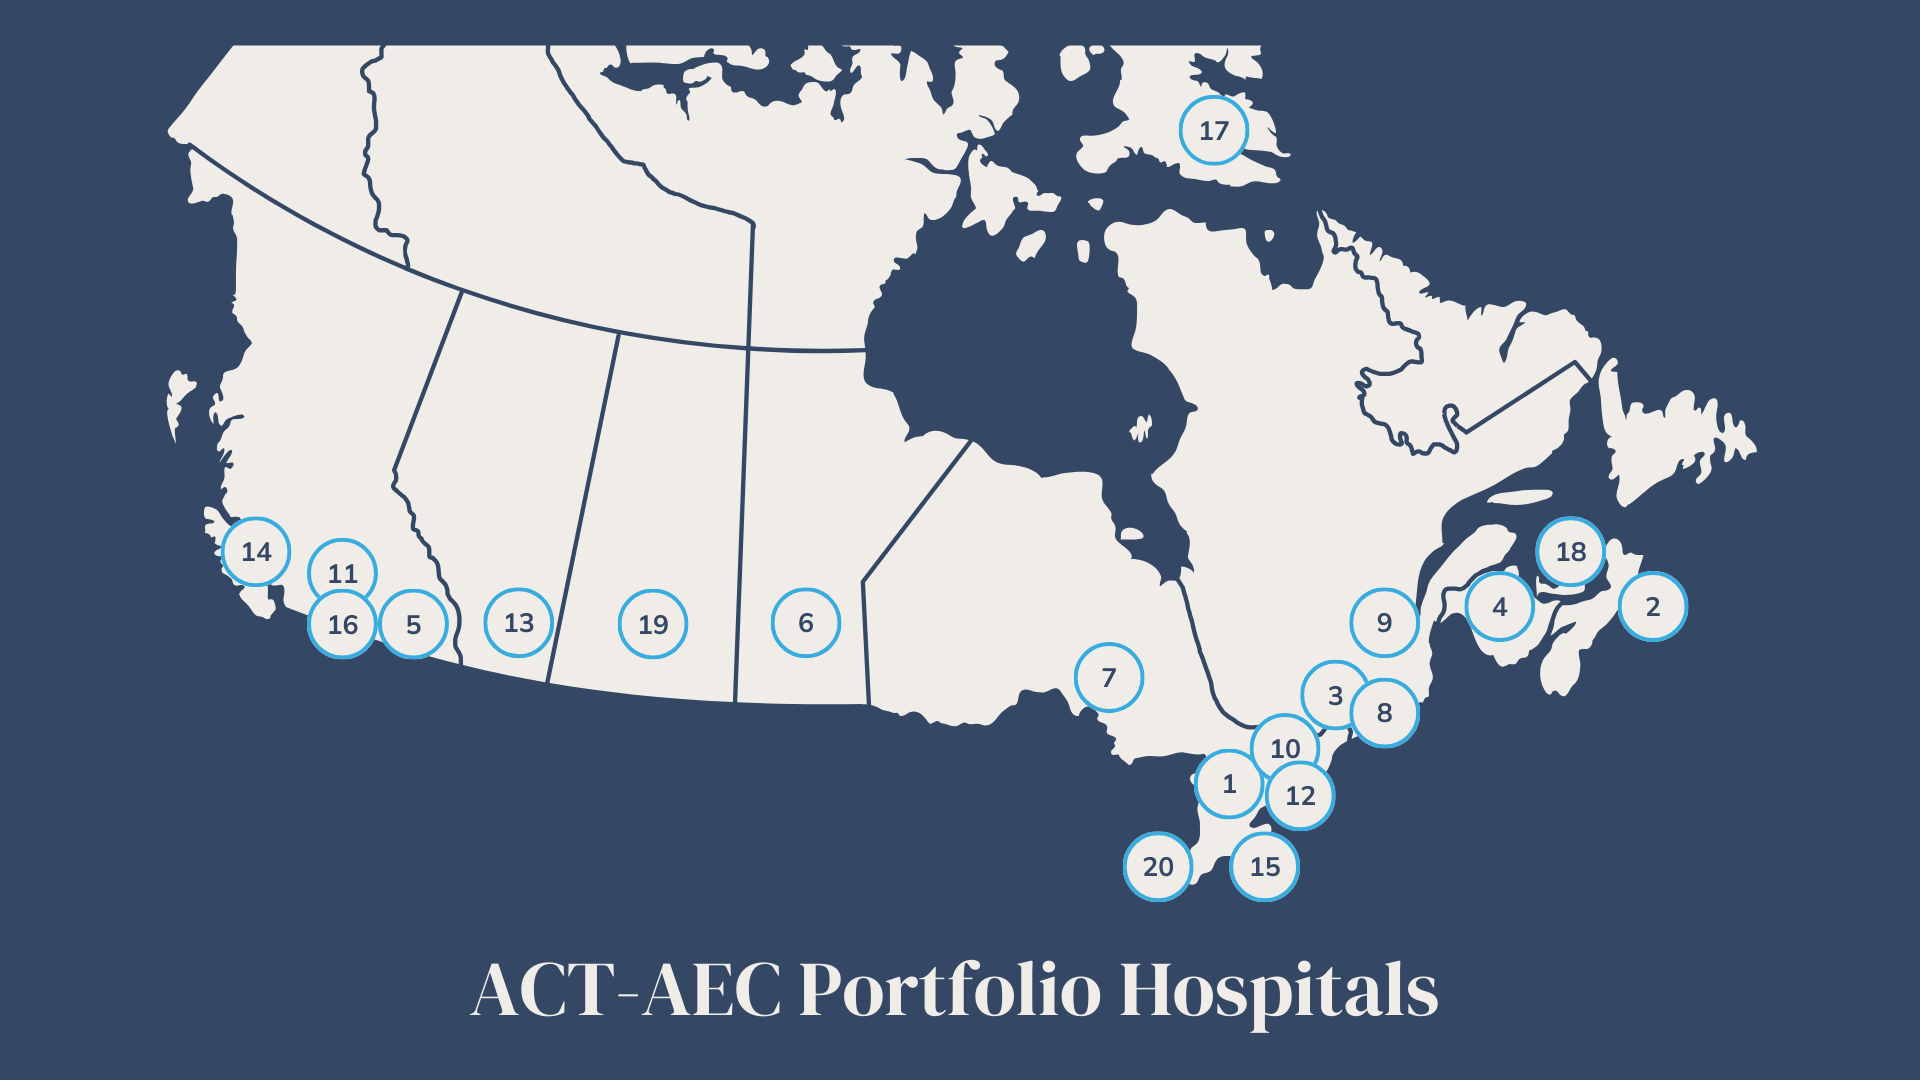 ACT Portfolio Hospitals Map of Canada with 20 locations numbered across 10 provinces